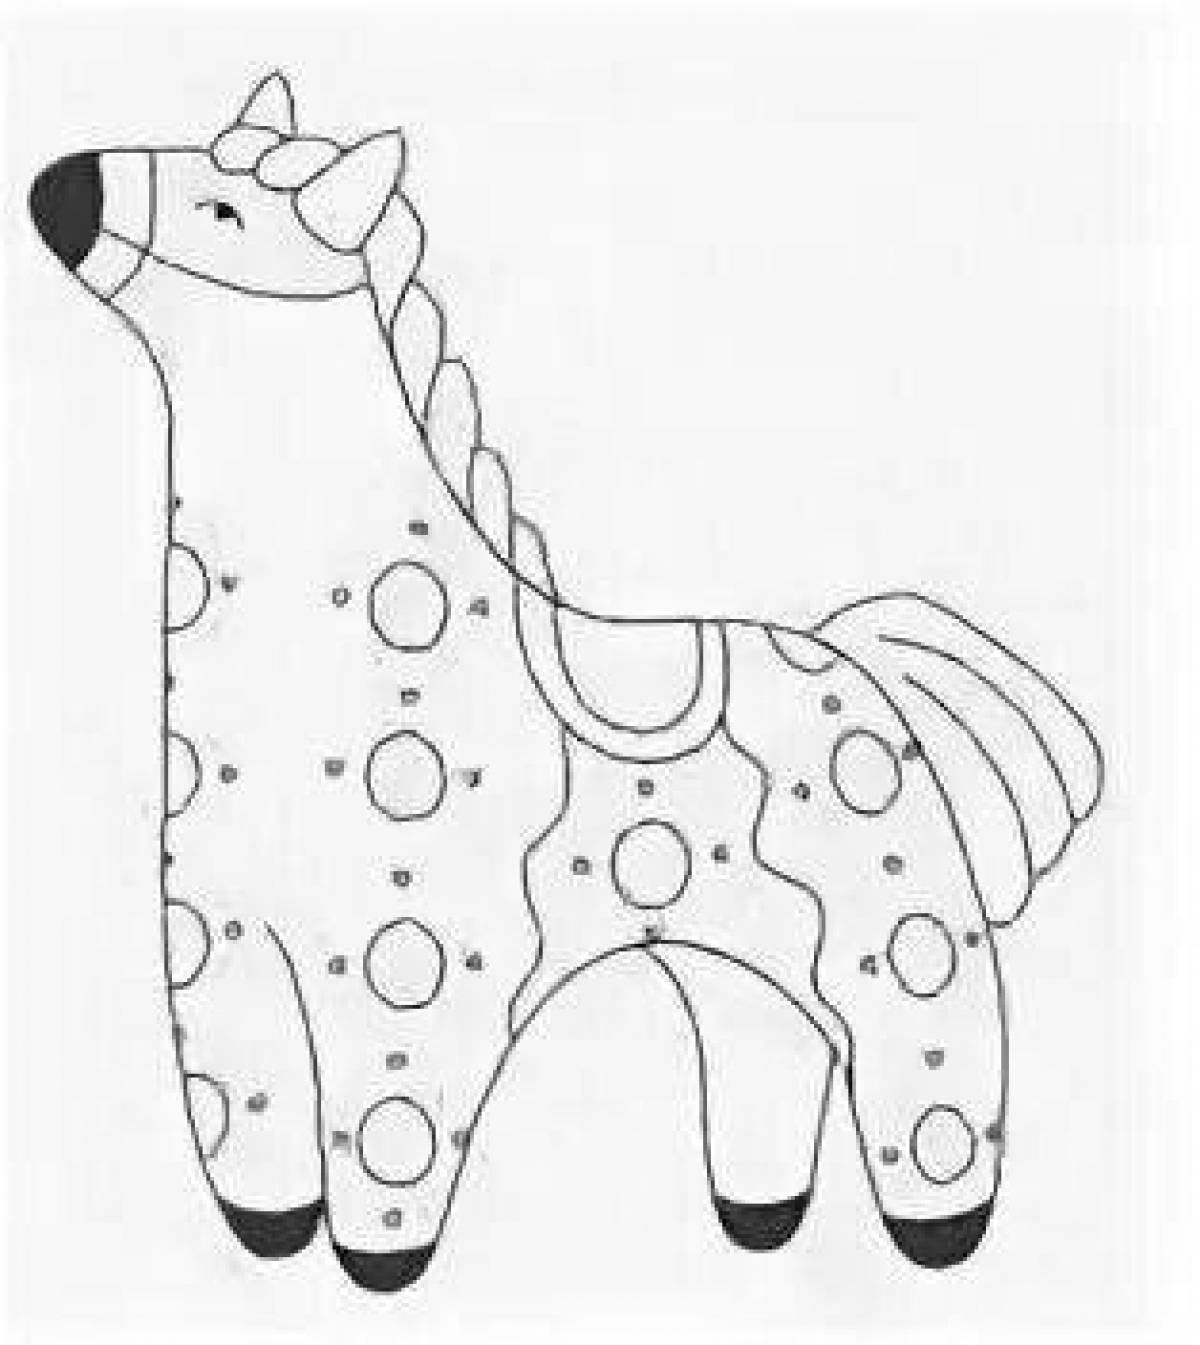 Coloring page joyful Dymkovo horse for children